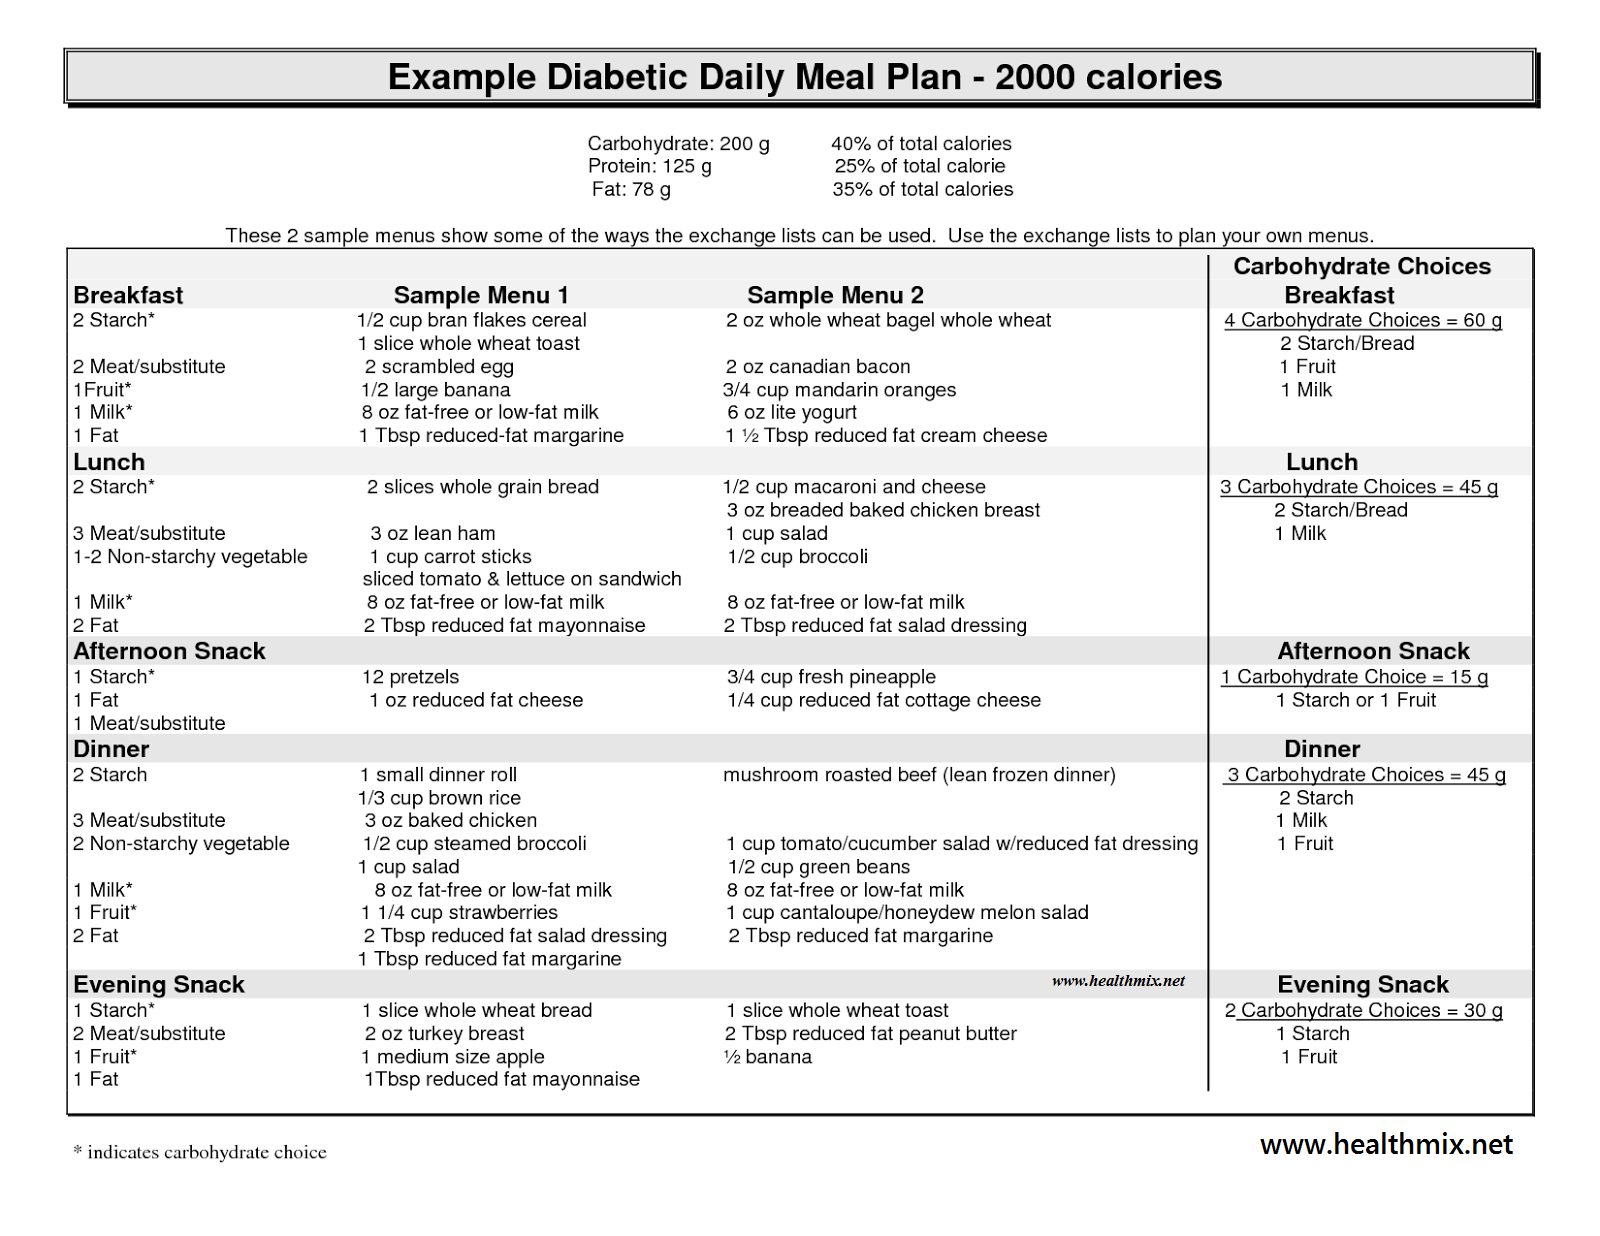 You can control or prevent diabetes by following the above meal plan ...